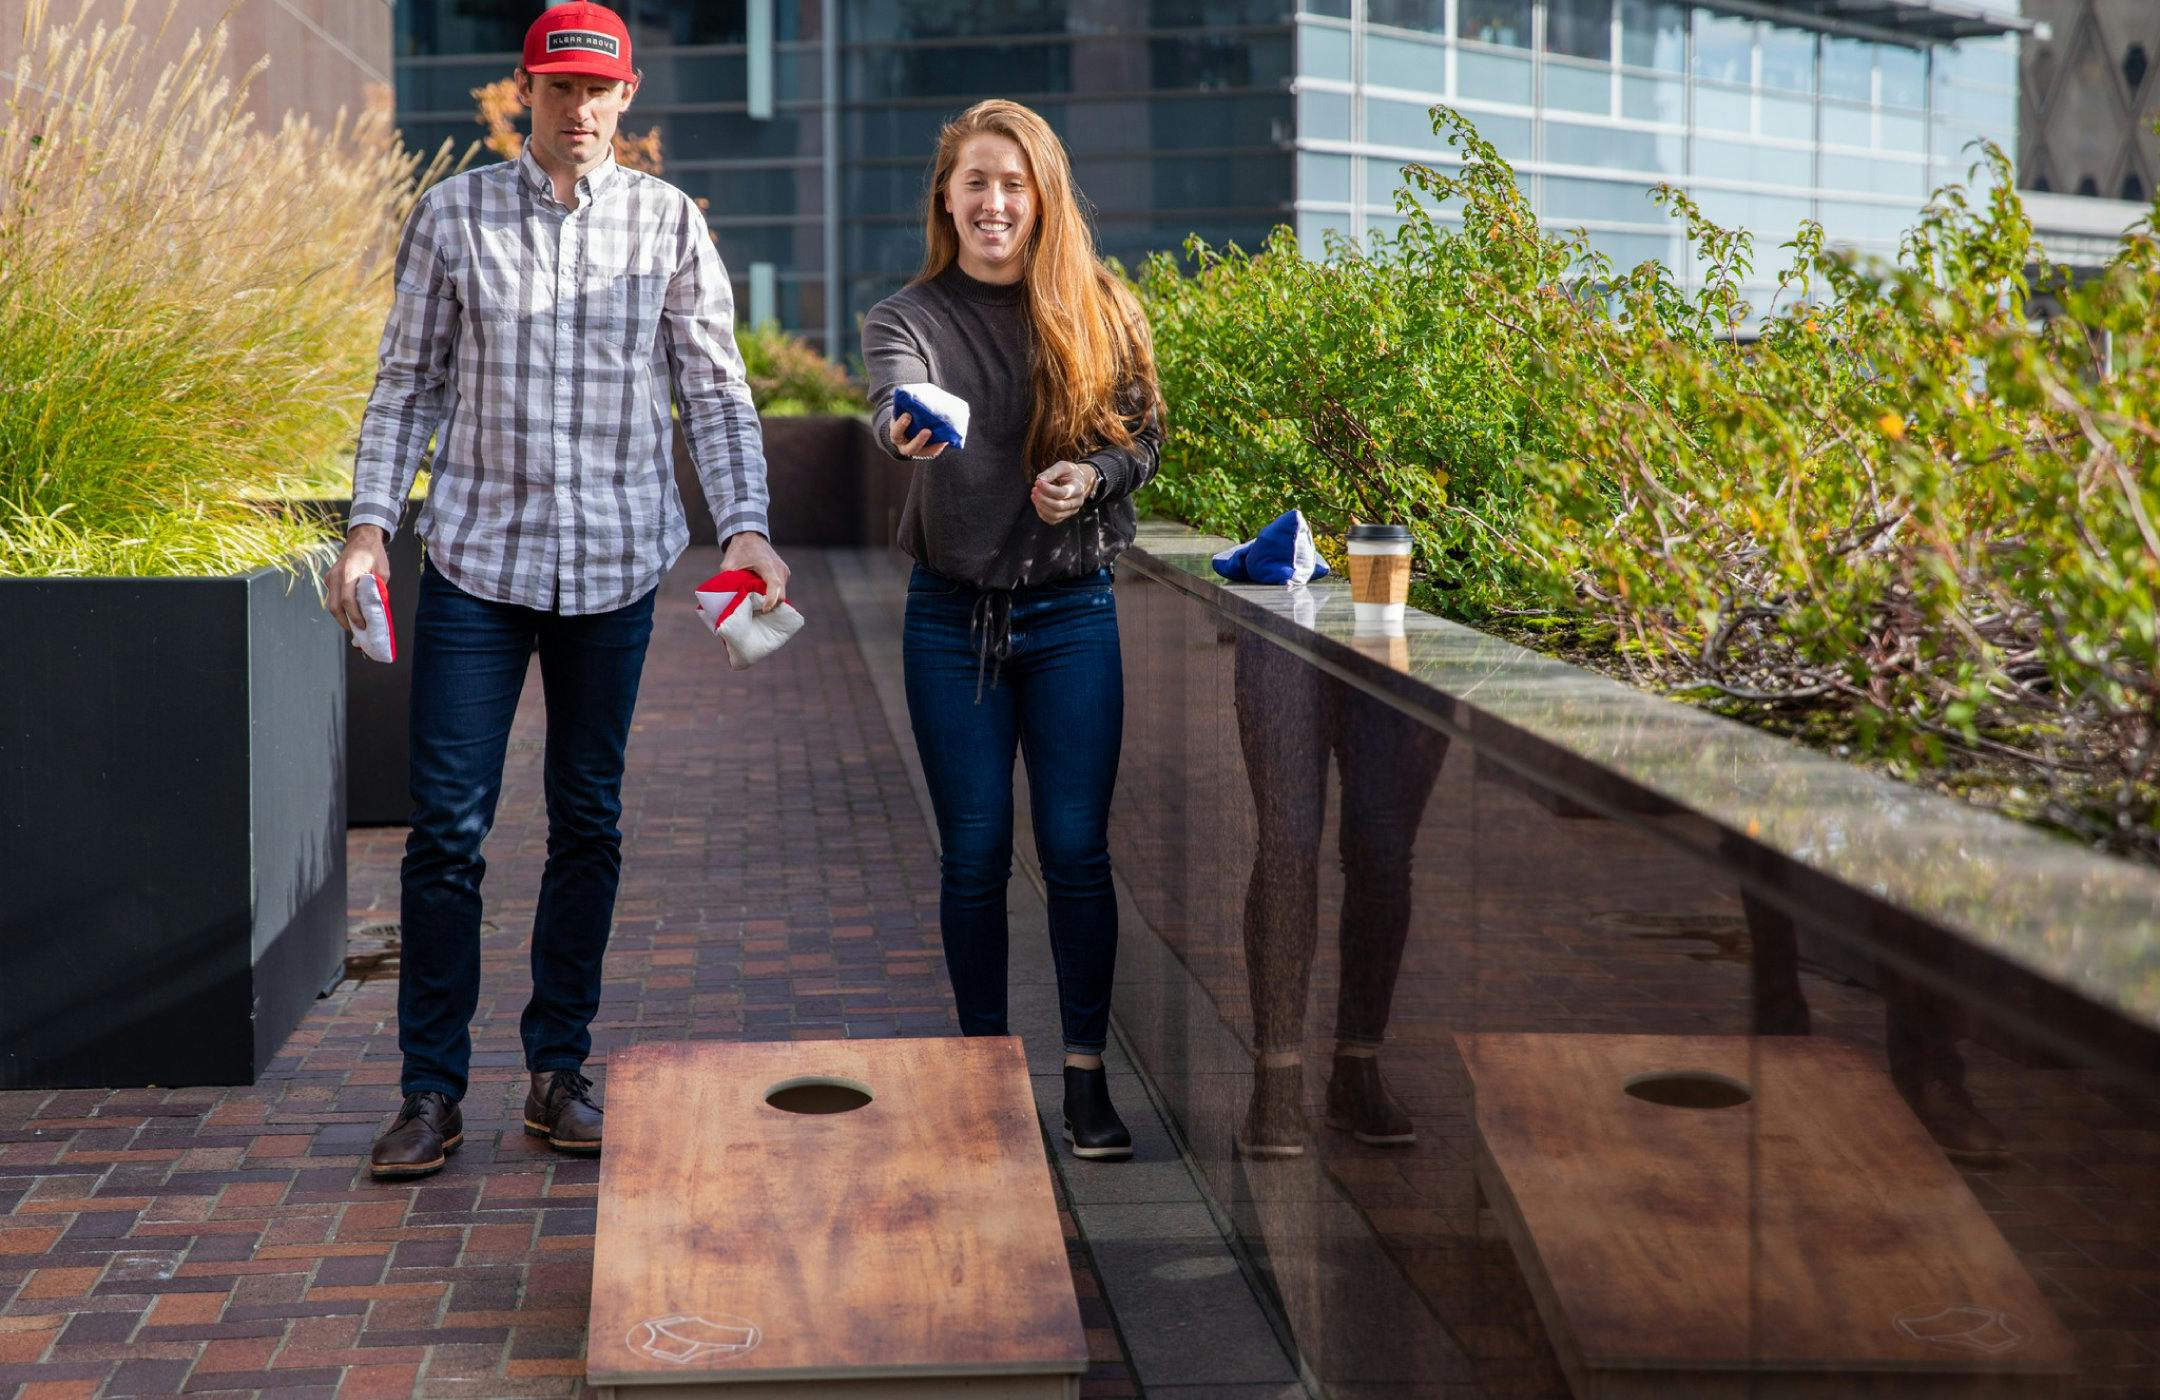 Photograph of two Amperity employees playing corn hole